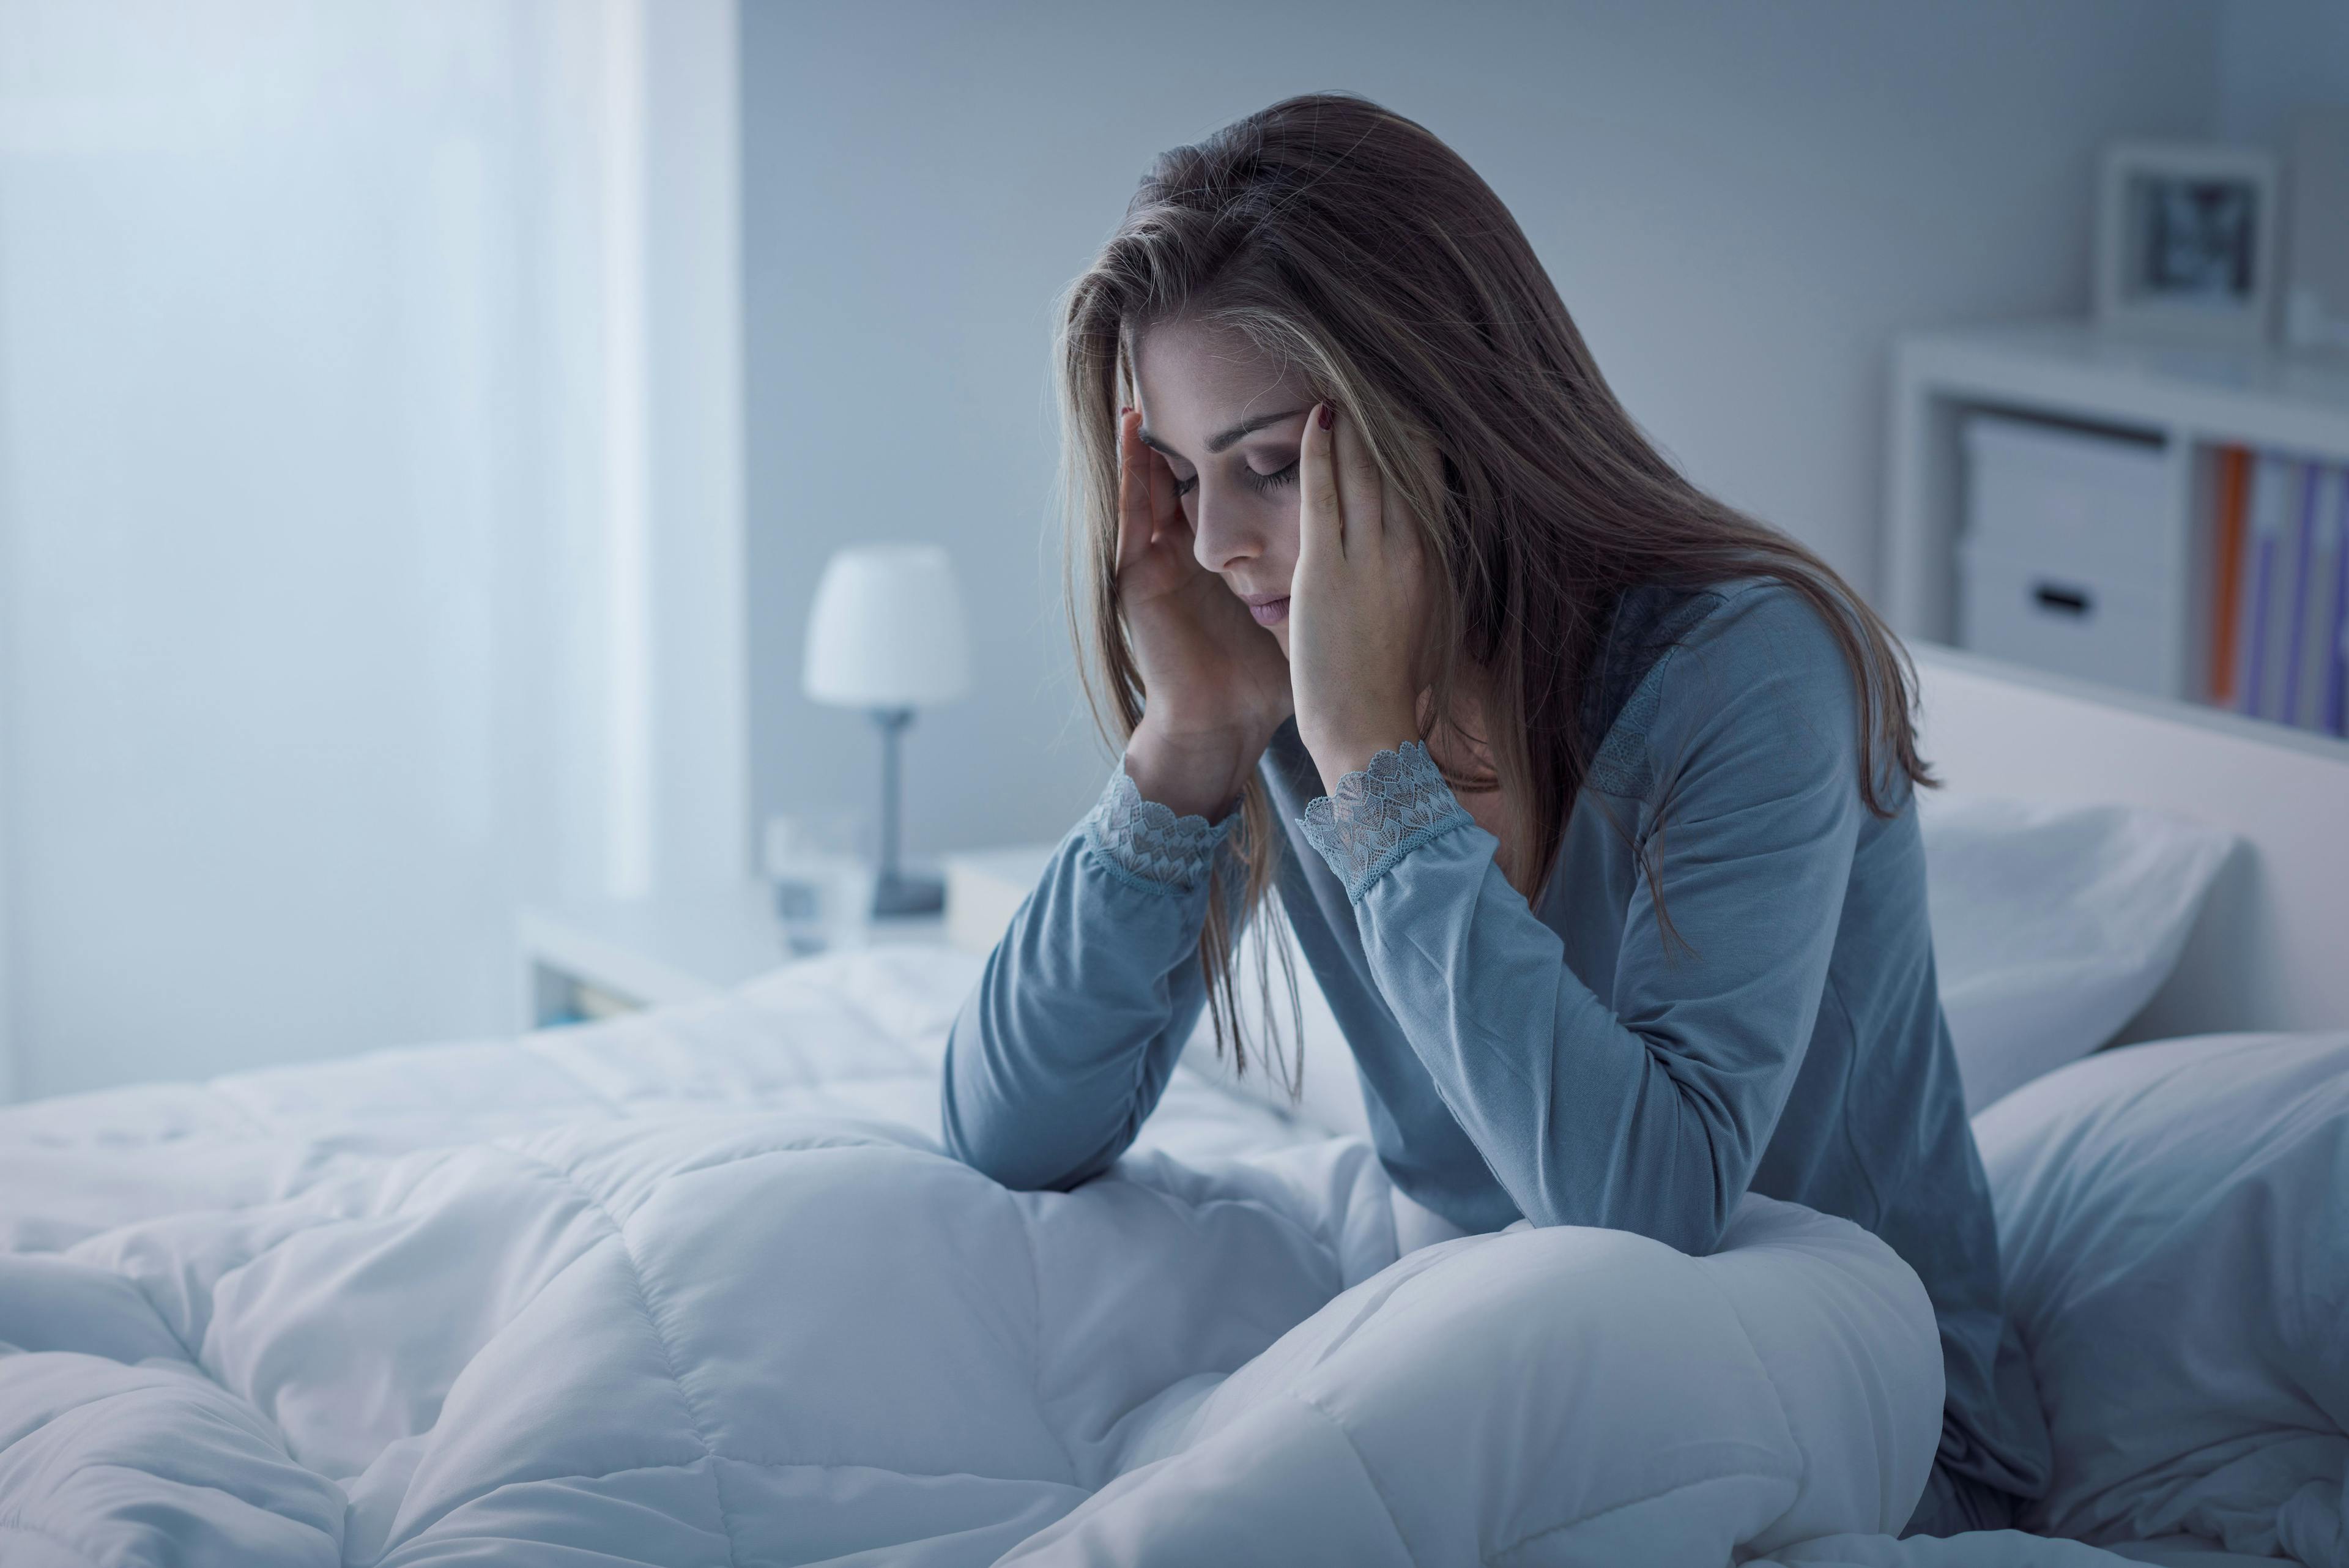 When sleep problems persist for longer than three months, the diagnosis changes to chronic insomnia. About 6% to 10% of the population experiences long-term sleep woes and meets the diagnostic criteria for chronic insomnia. © StockPhotoPro - stock.adobe.com